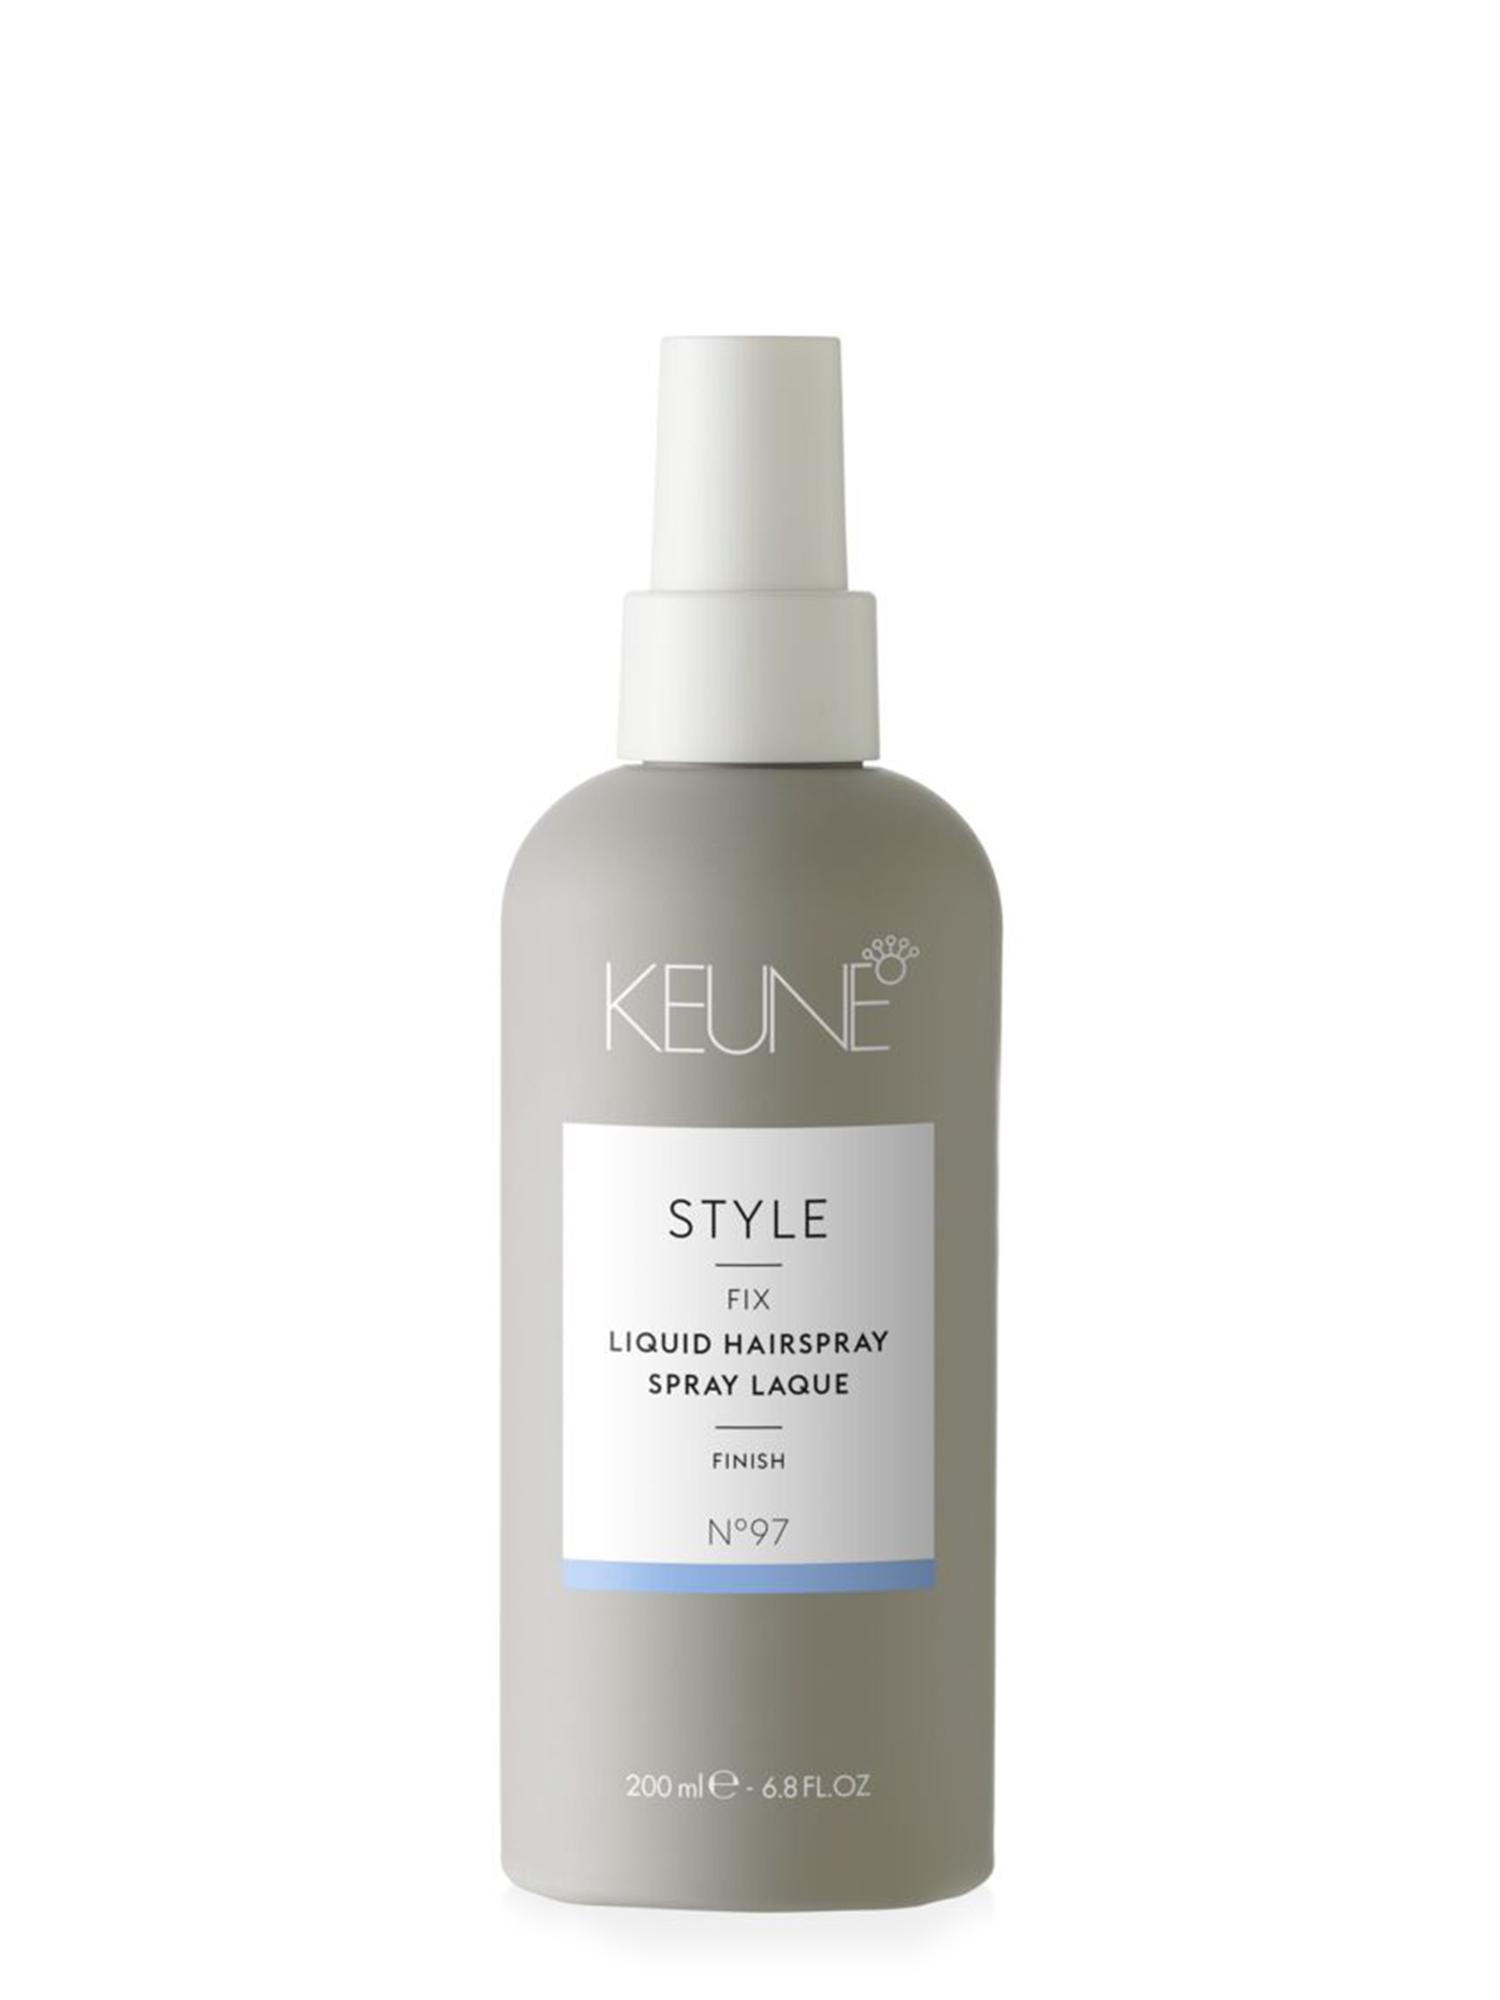 STYLE LIQUID HAIRSPRAY: Non-aerosol hairspray for extra strong hold, shine, and structure. The perfect hair styling product available on keune.ch.